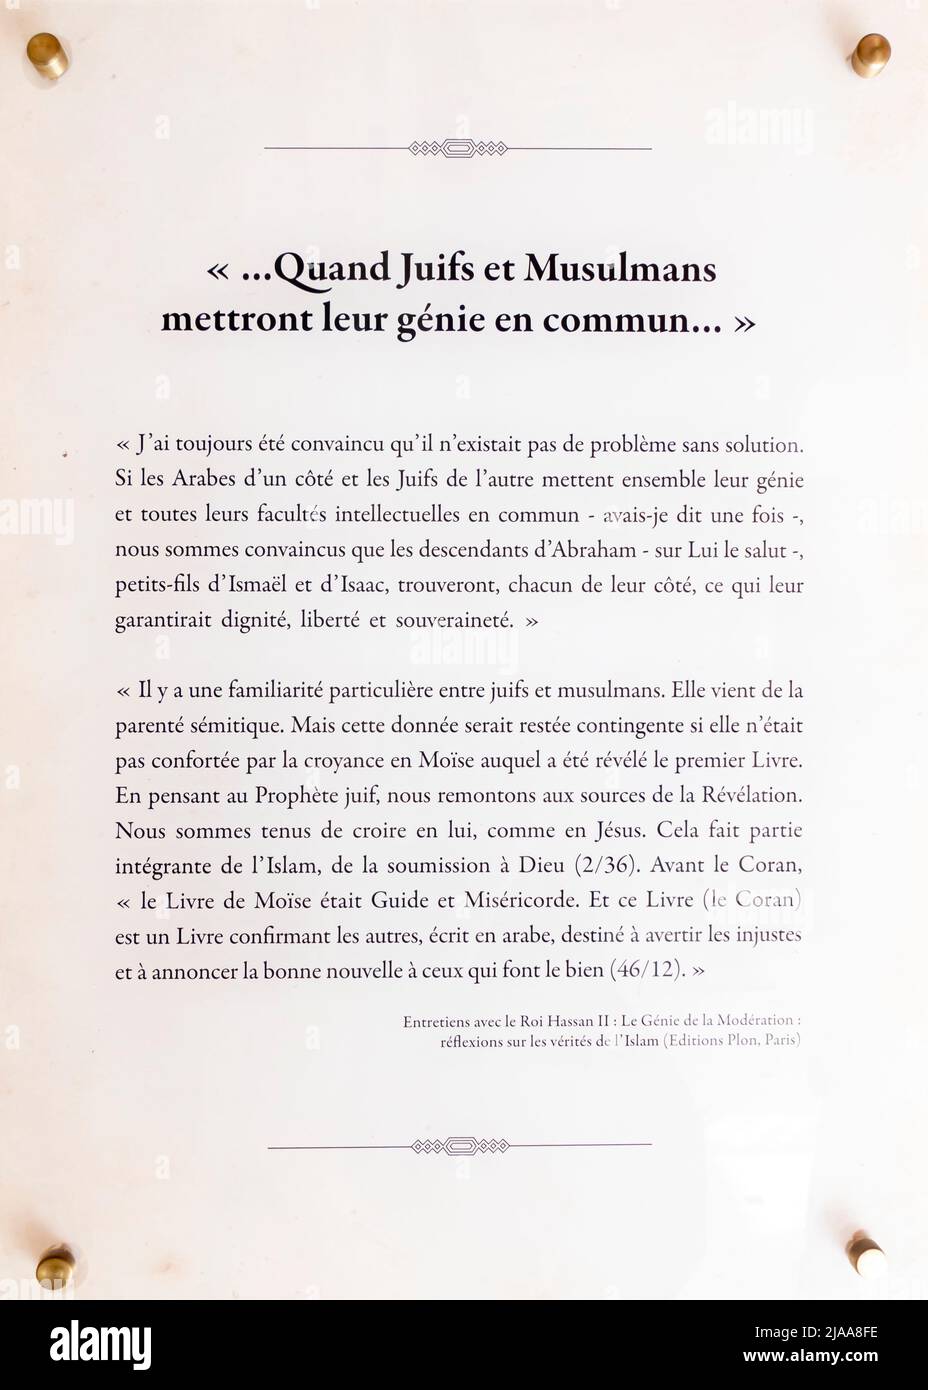 Moroccan Le Roi Hassan 2 excerot on Jews and Muslims - things in common, Bayt Dakira, Museum in Essaouira, Morocco Stock Photo